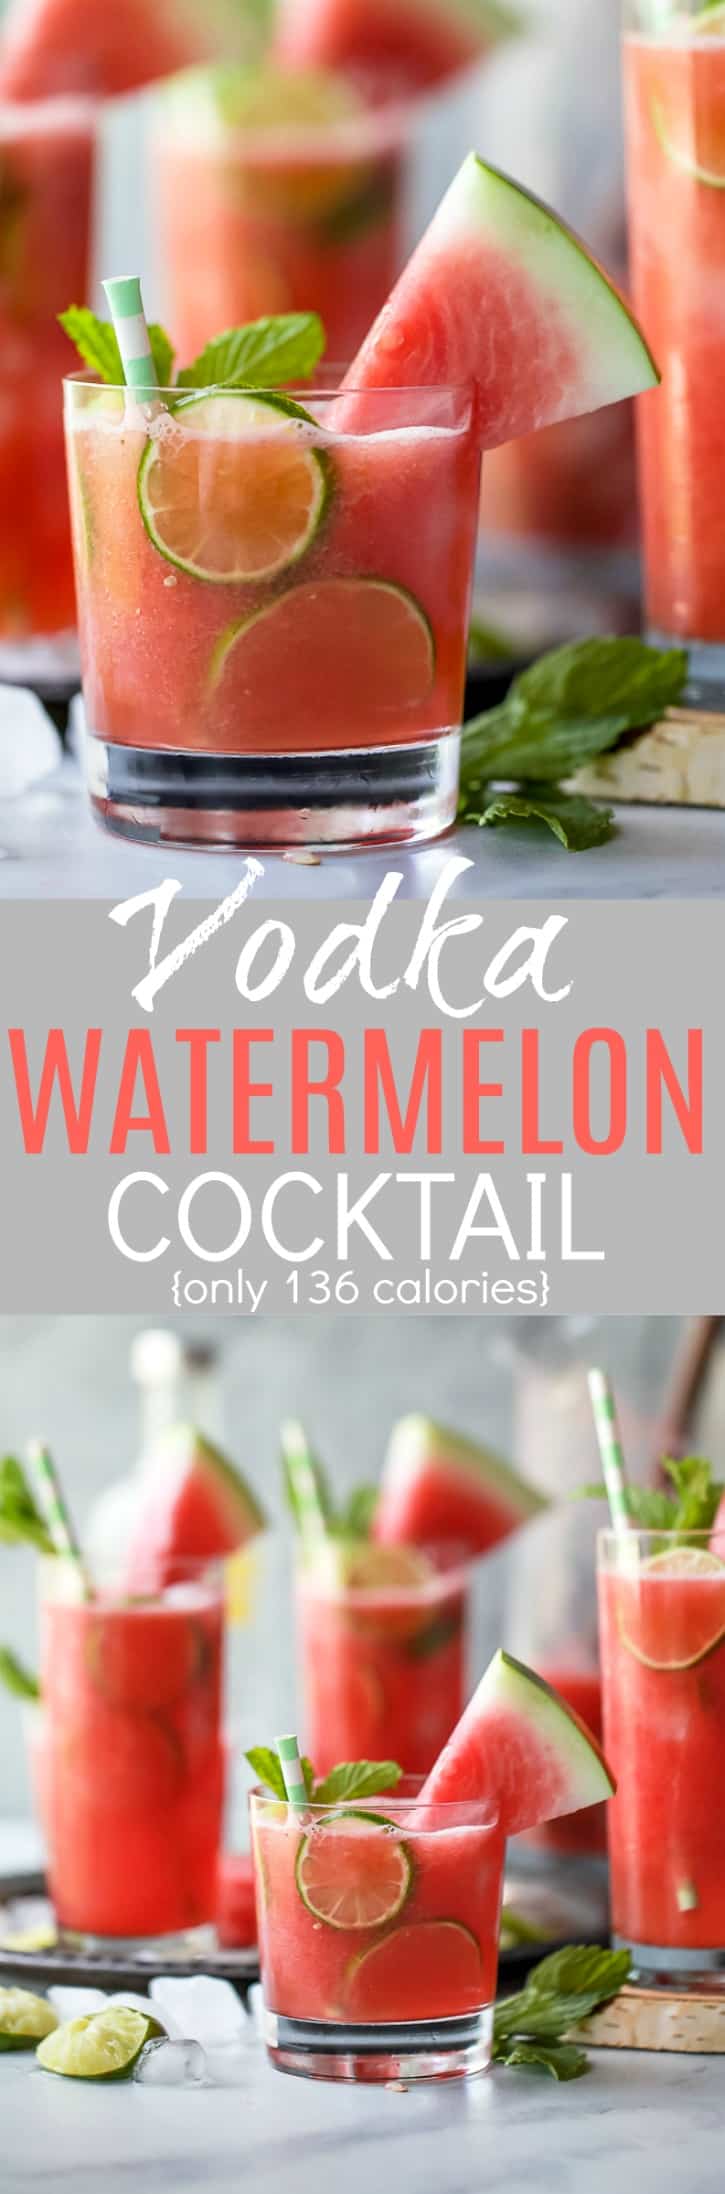 Vodka Watermelon Cocktail Recipe Summer Cocktails,Master Forge Grill